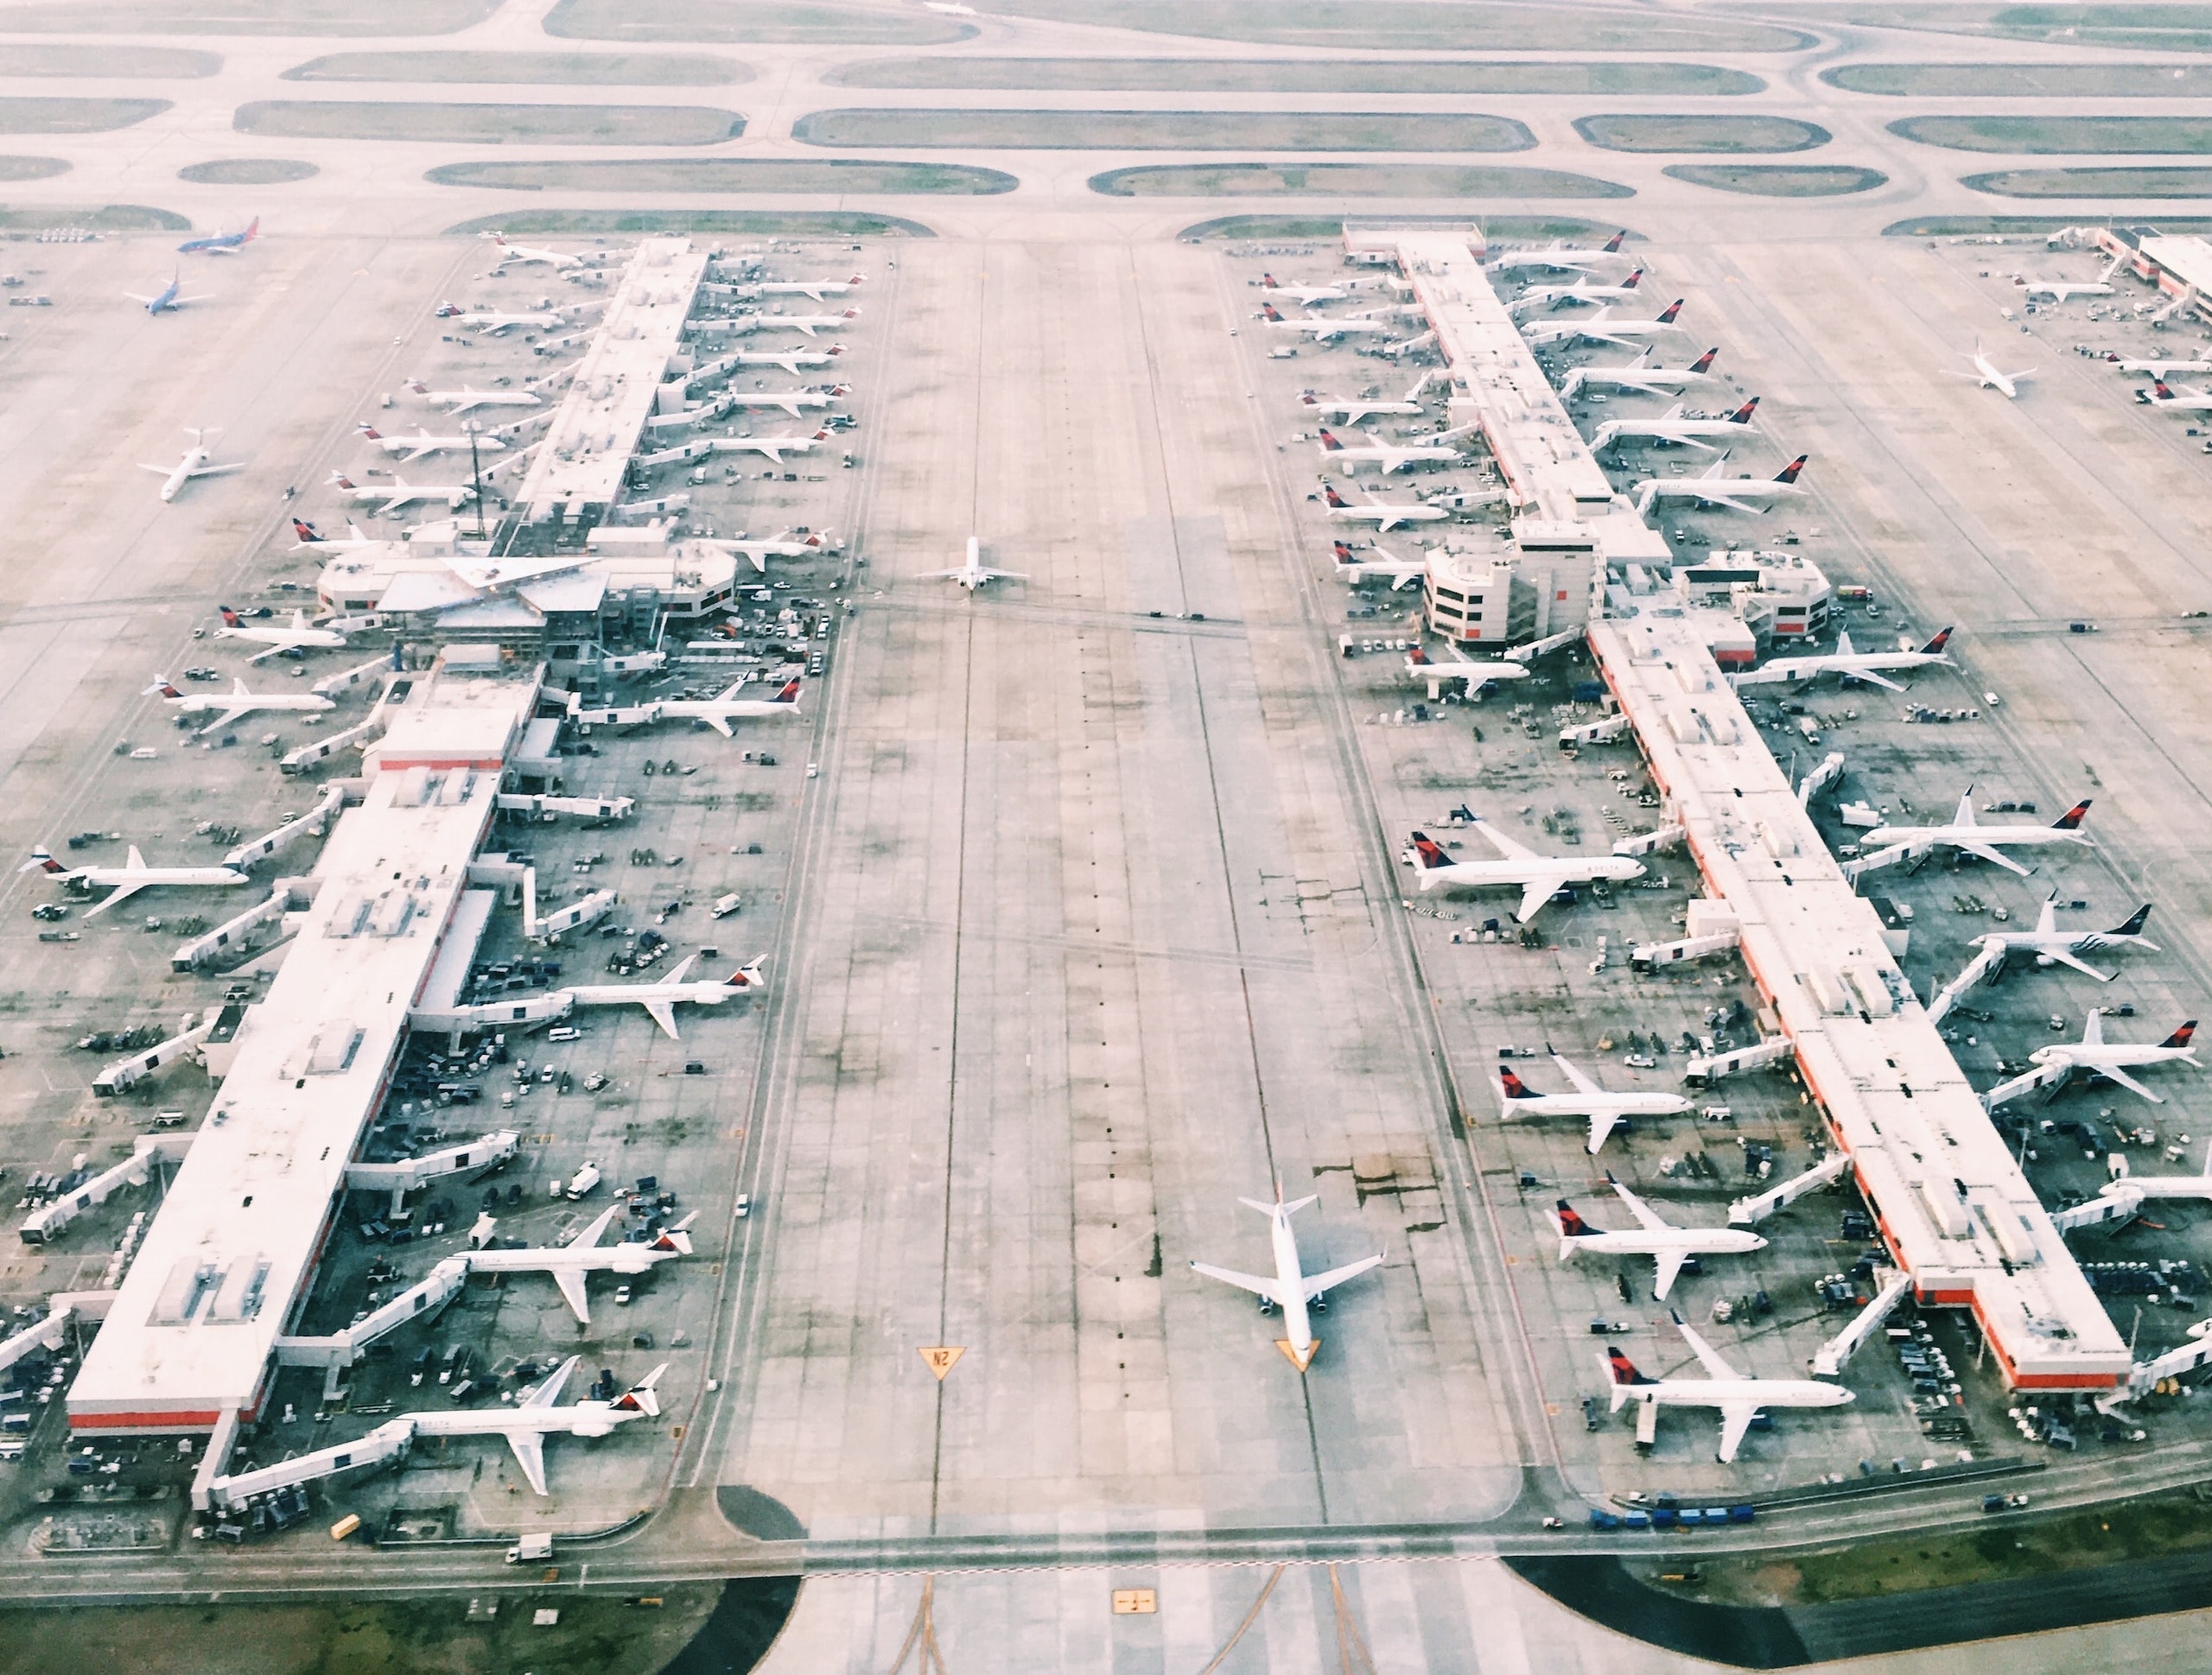 Aerial photo of an airport with planes lined up at terminals